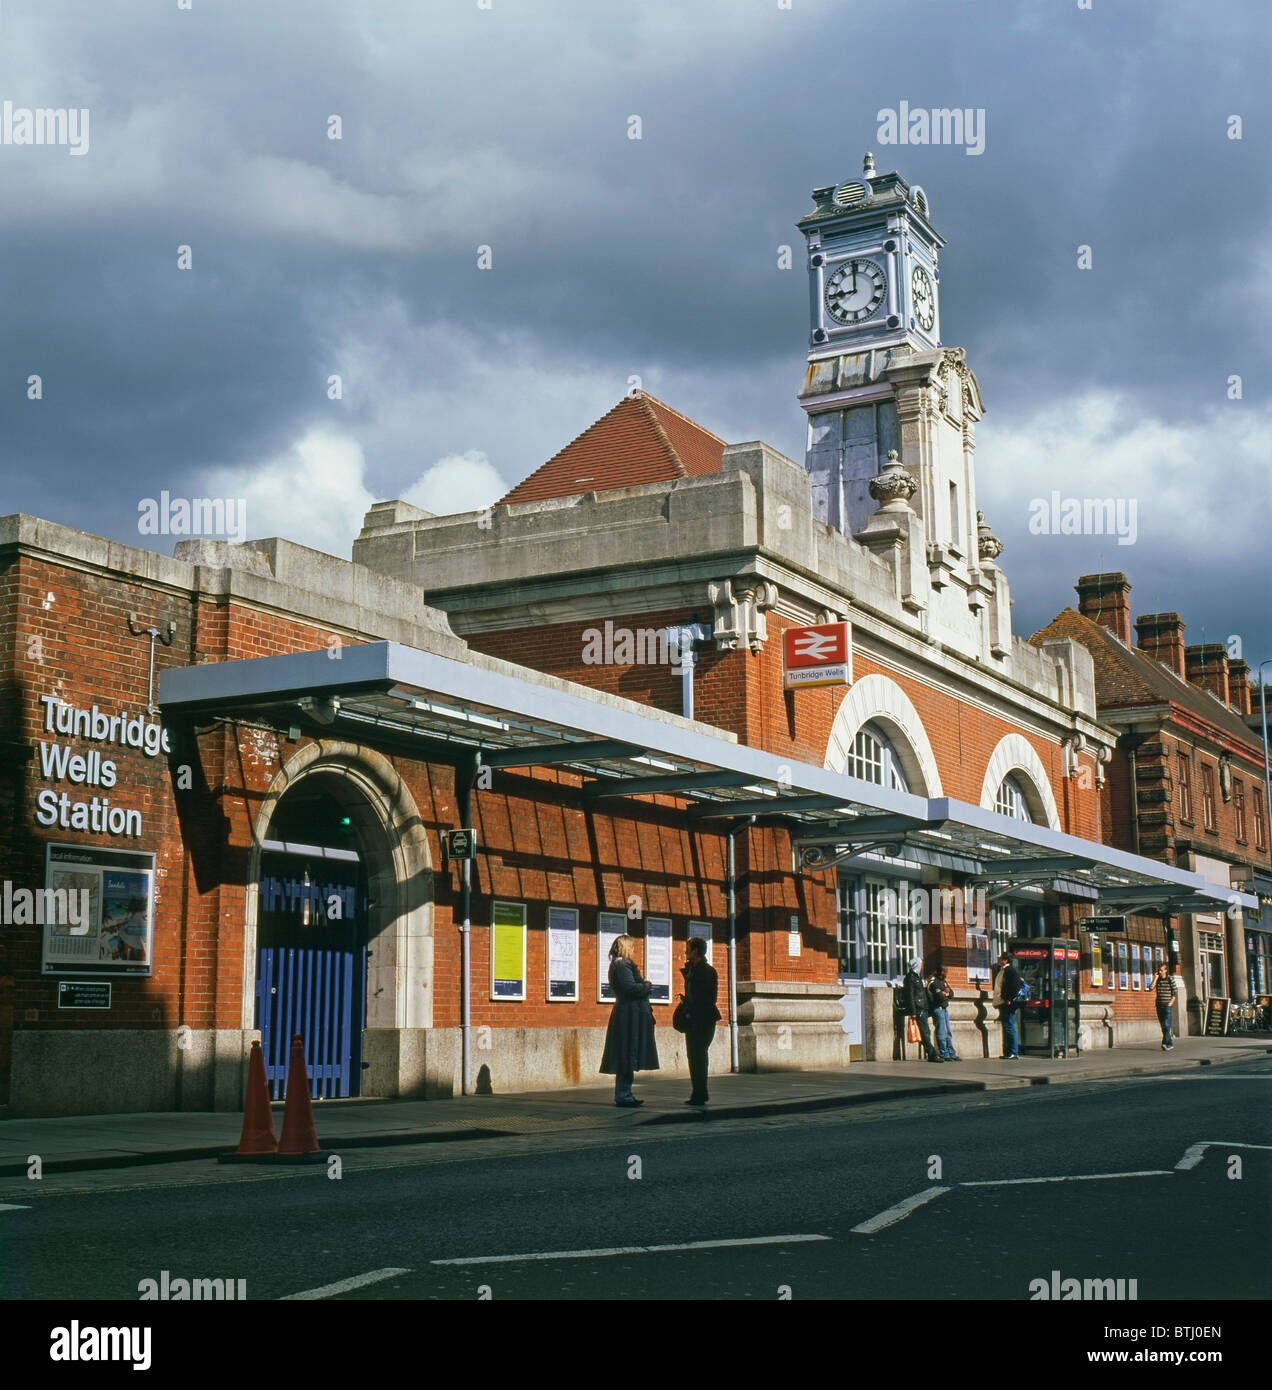 People standing waiting talking outside Tunbridge Wells Railway Station building with clock tower in Kent, England UK Great Britain   KATHY DEWITT Stock Photo